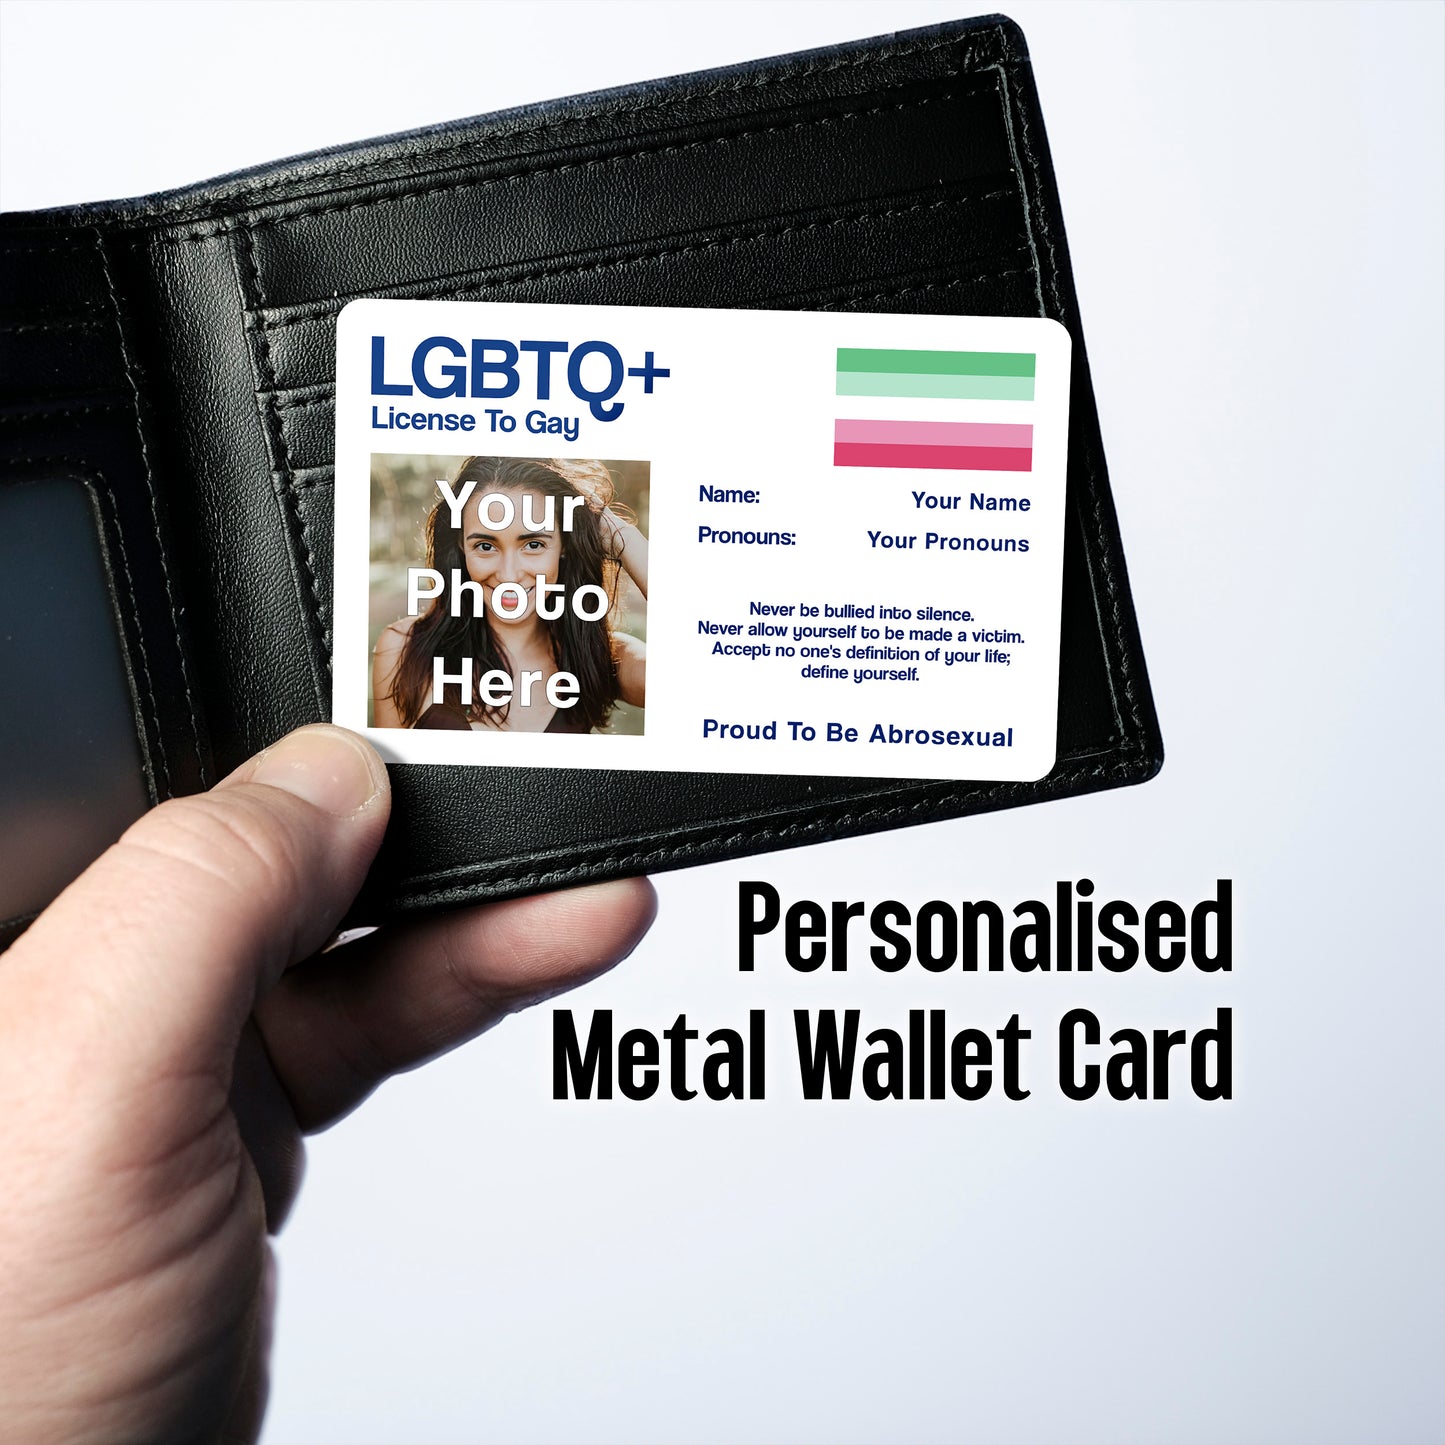 Abrosexual license to gay aluminium wallet card personalised with your name, pronouns, and photo